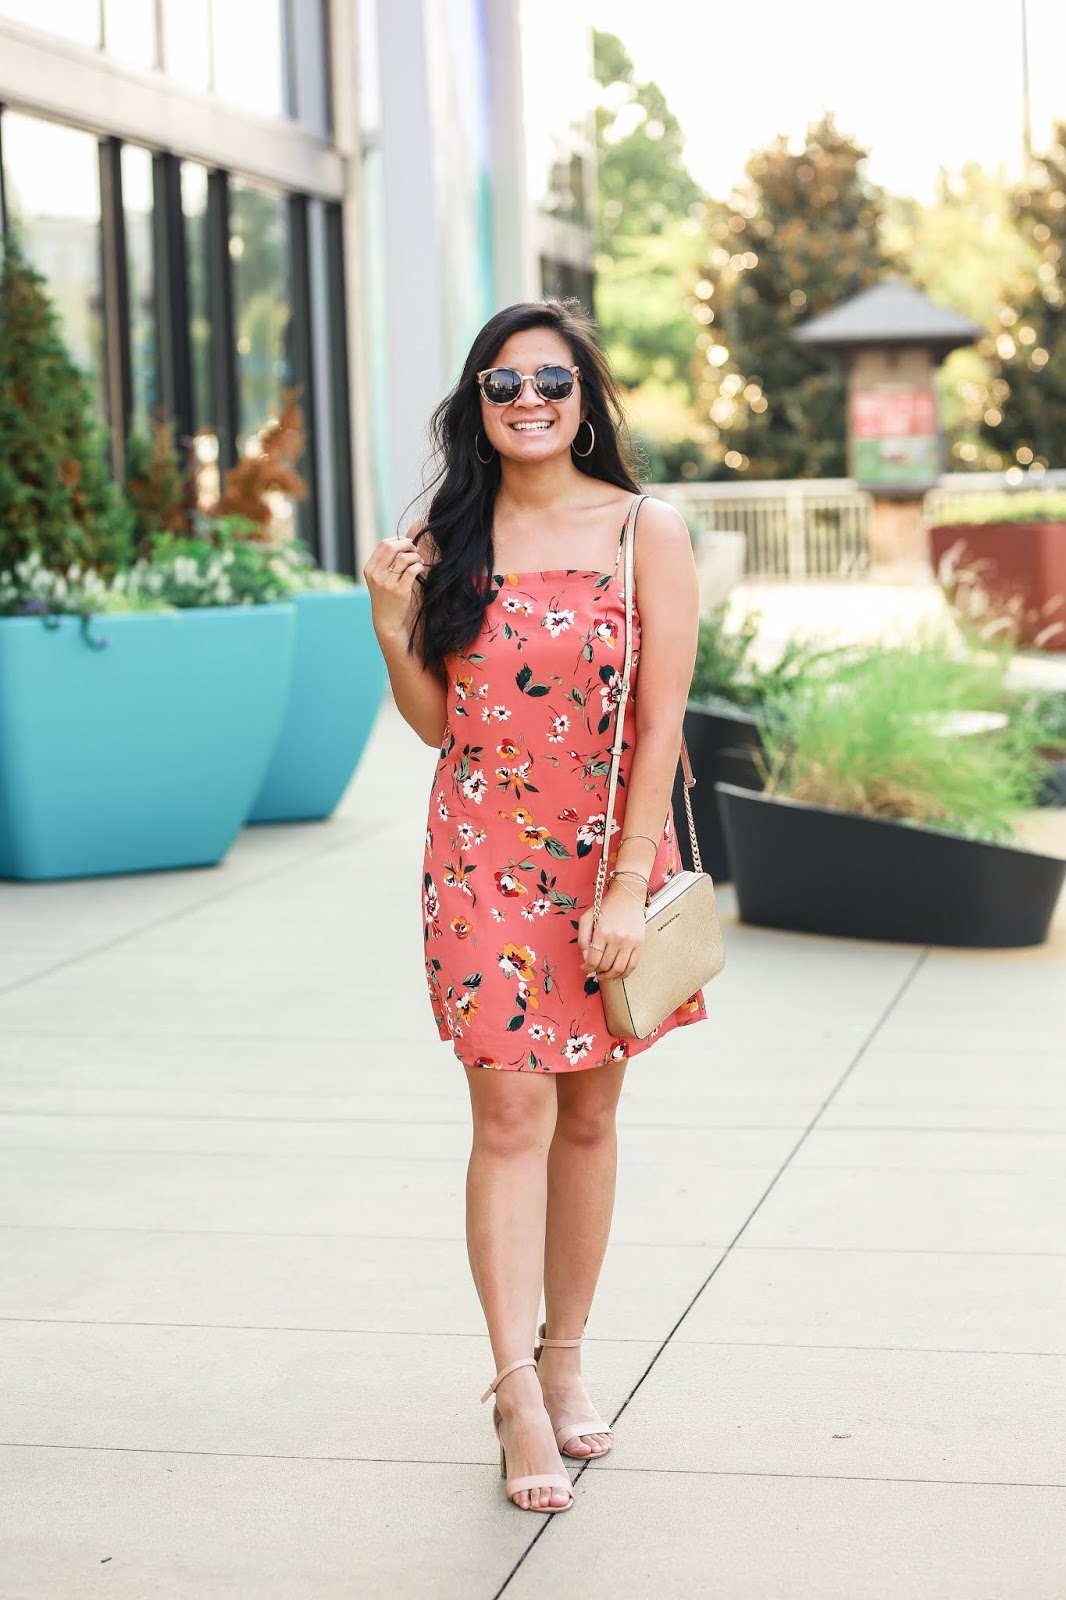 How to Wear and Style a Floral Dress